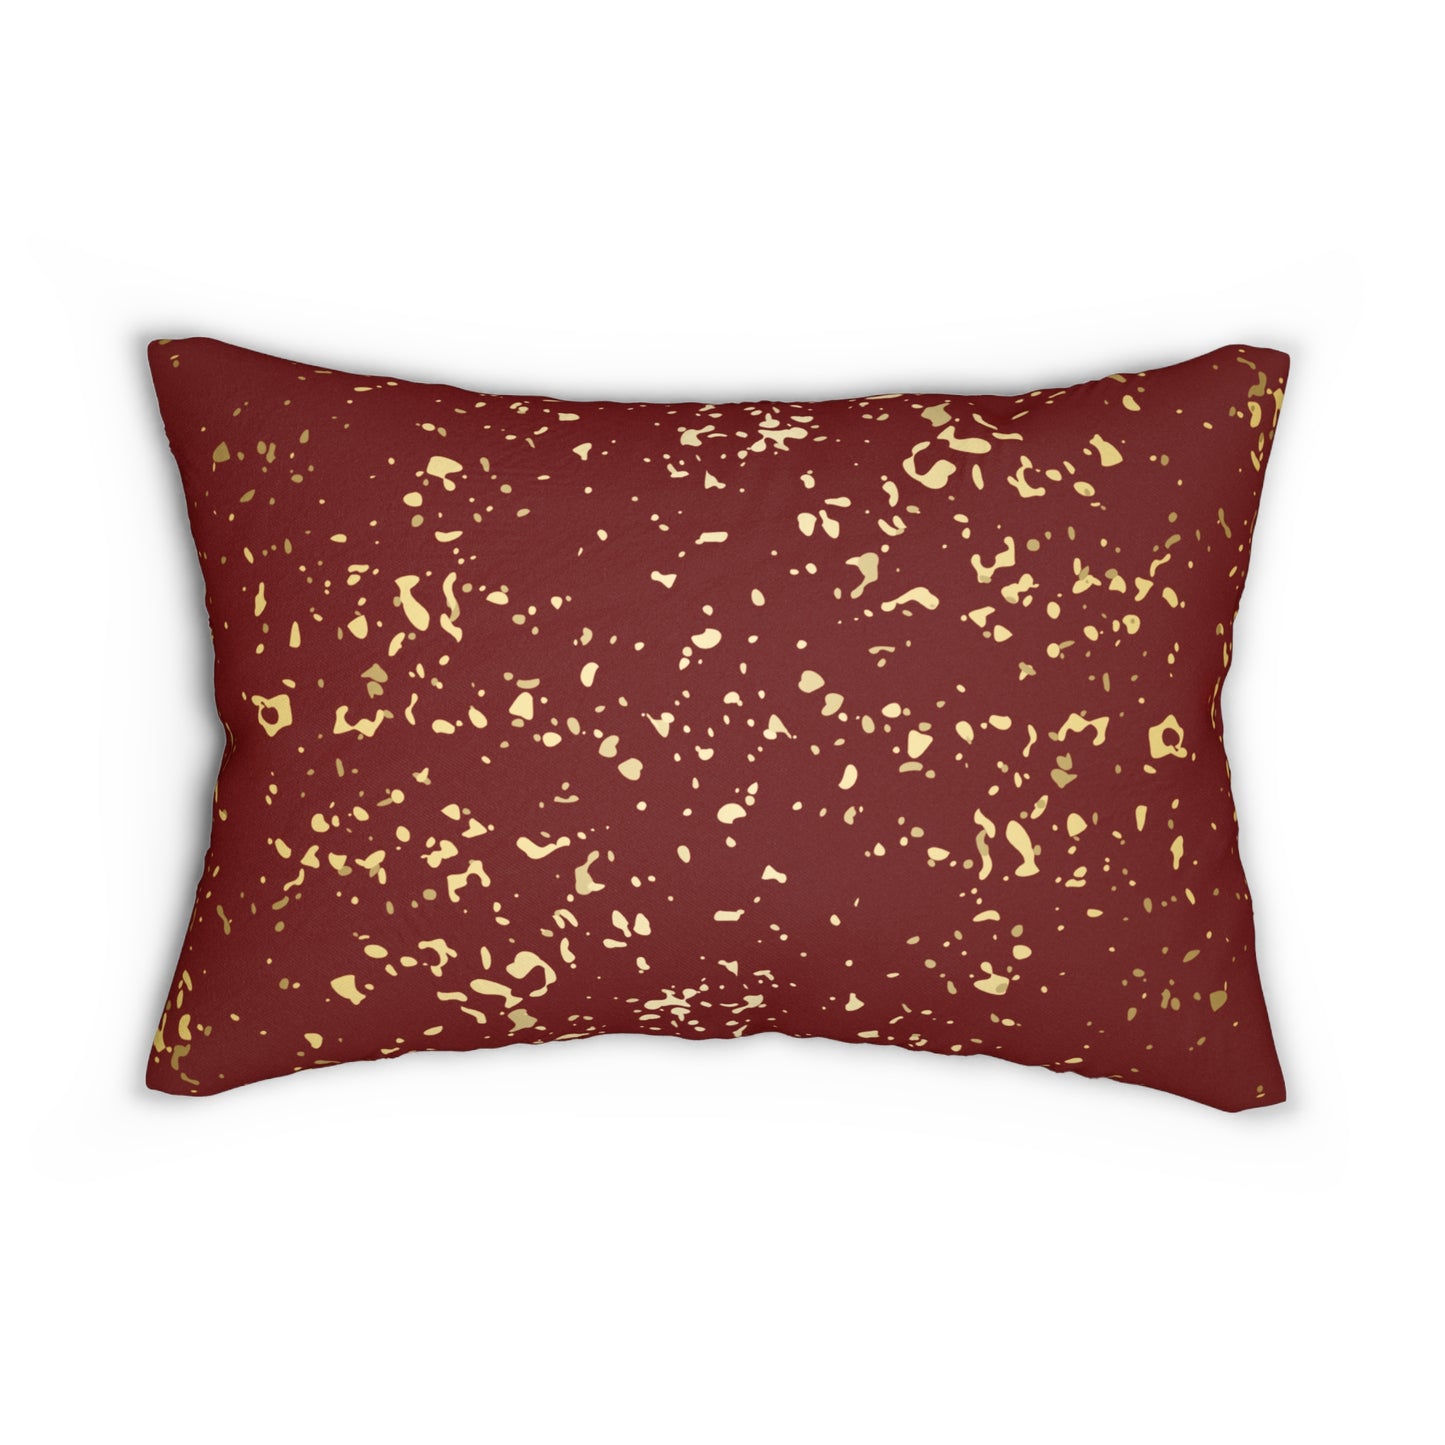 Maroon and Gold Flakes Accent Pillow